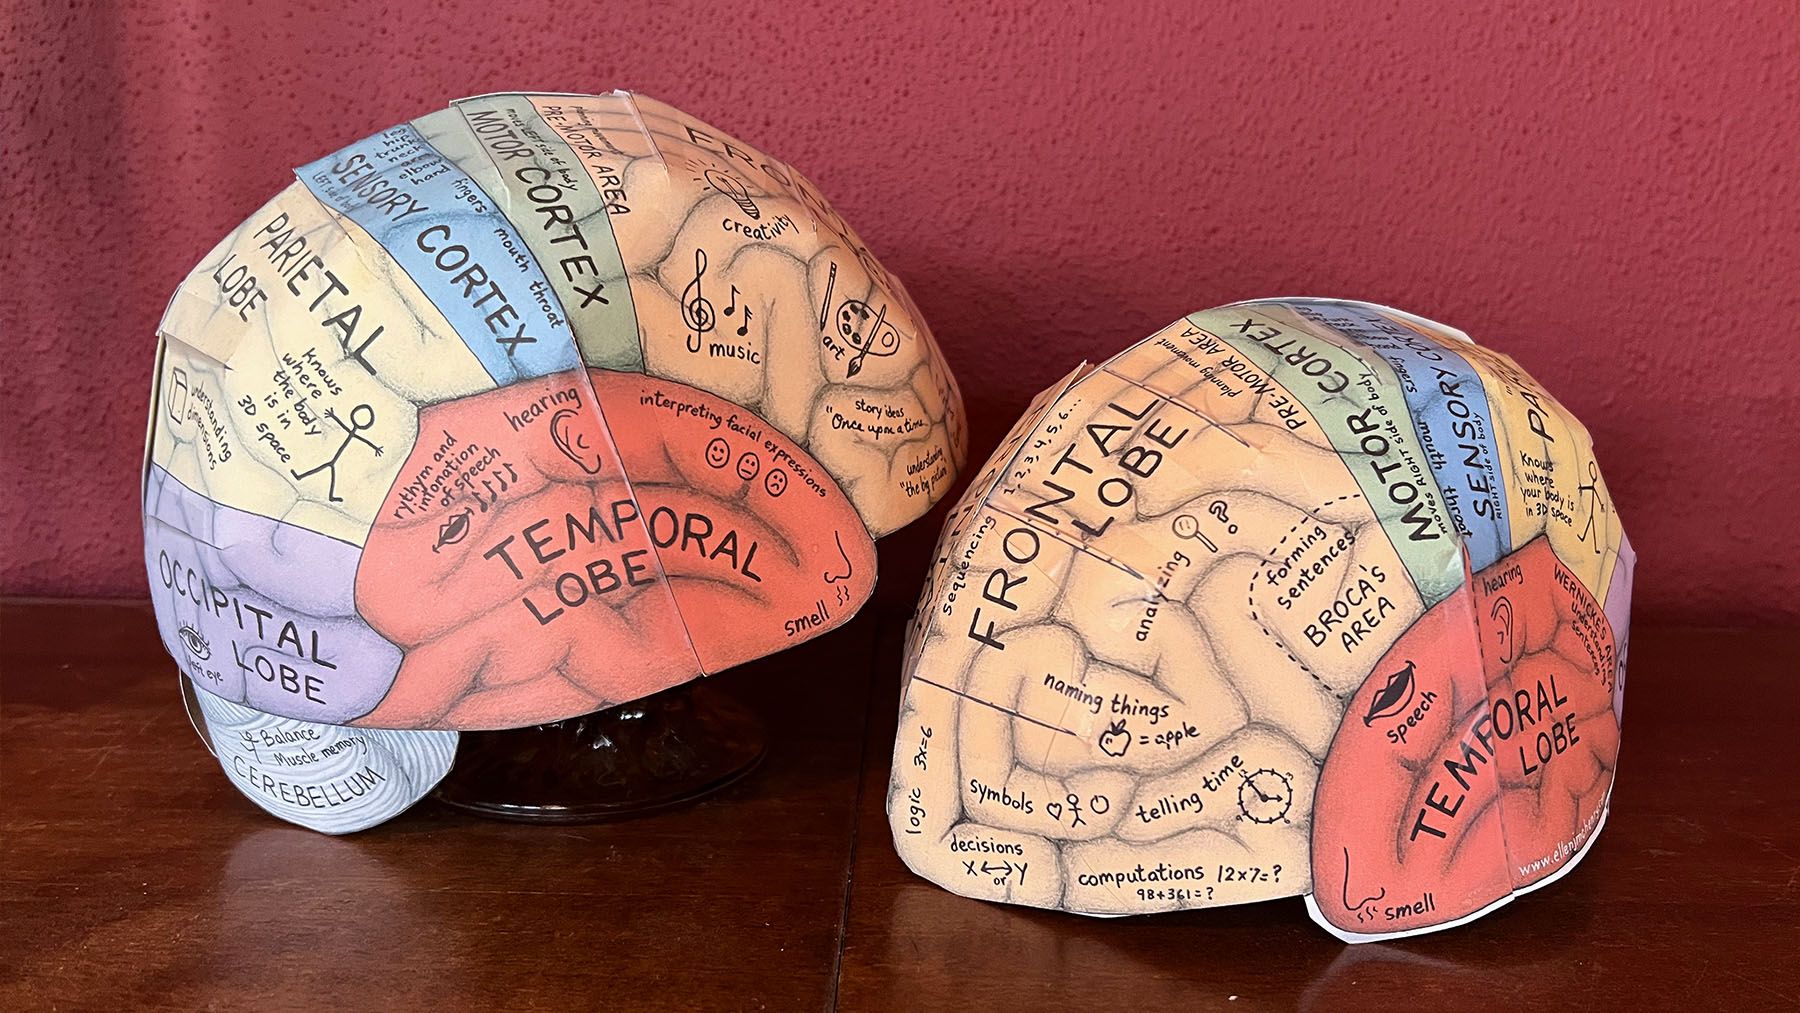 Two paper hats shaped like brains, with regions of the brain labeled.